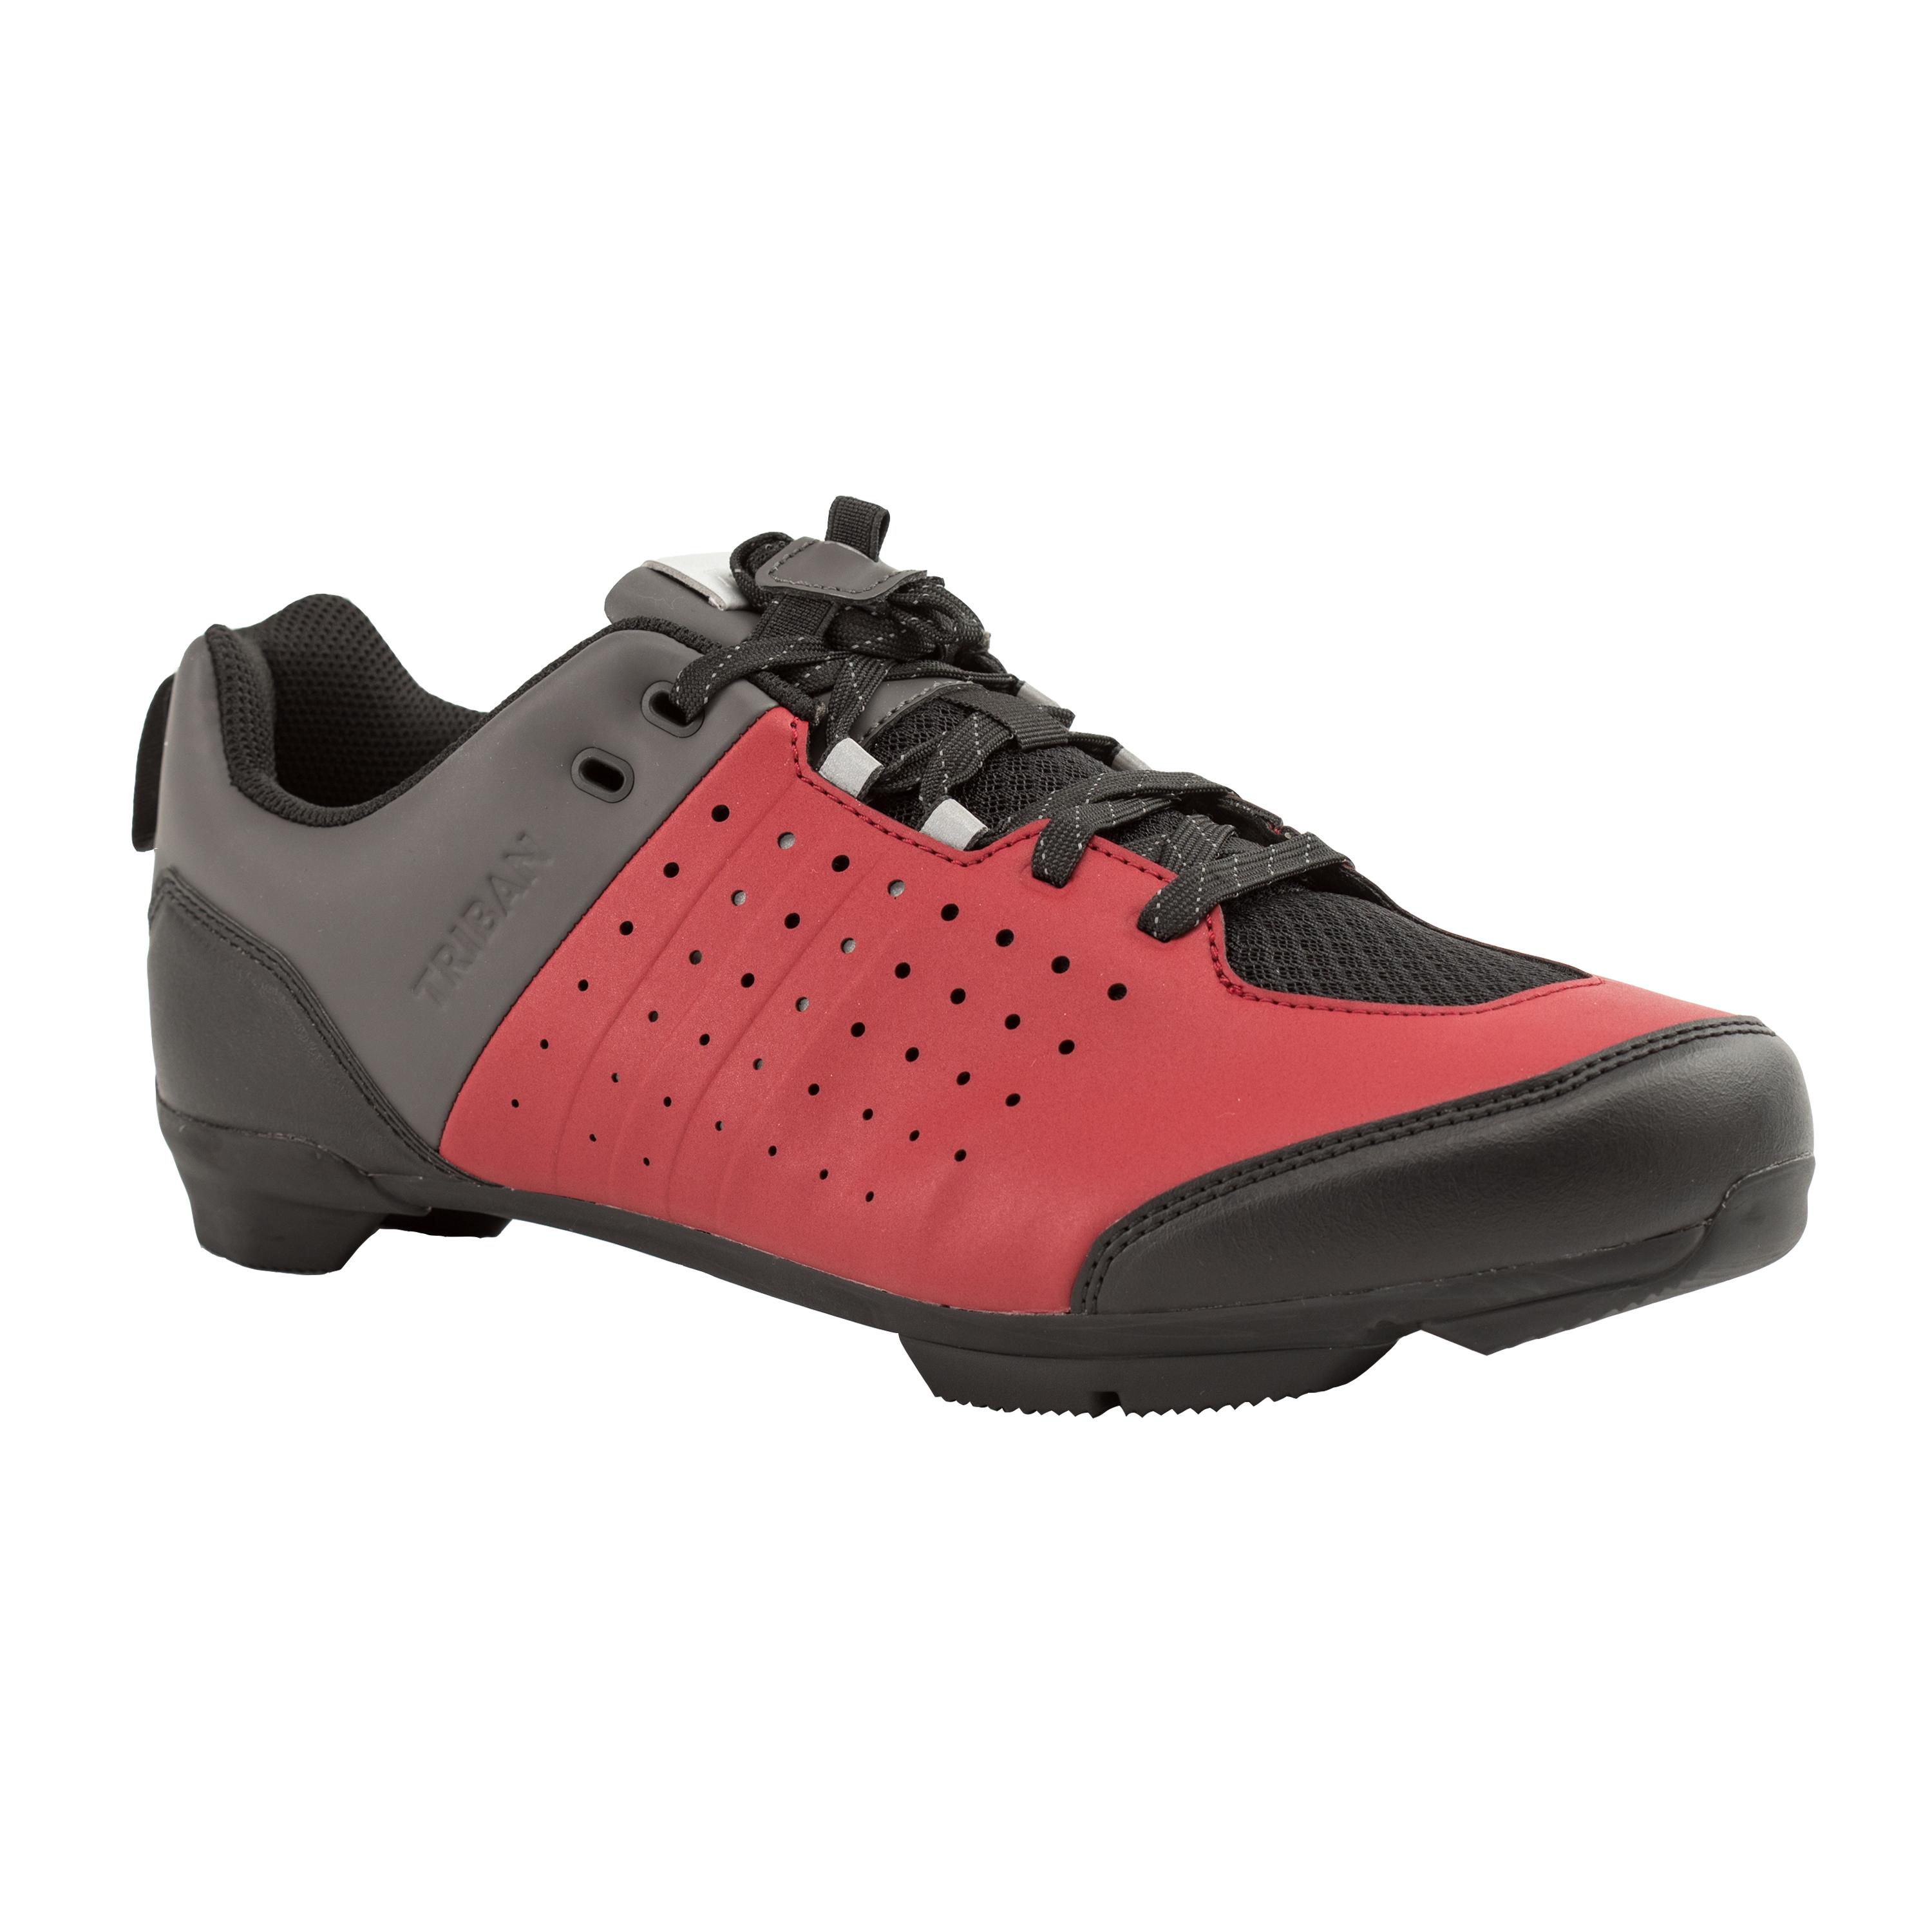 TRIBAN Road and Gravel Cycling Lace-Up SPD Shoes GRVL 500 - Burgundy / Grey